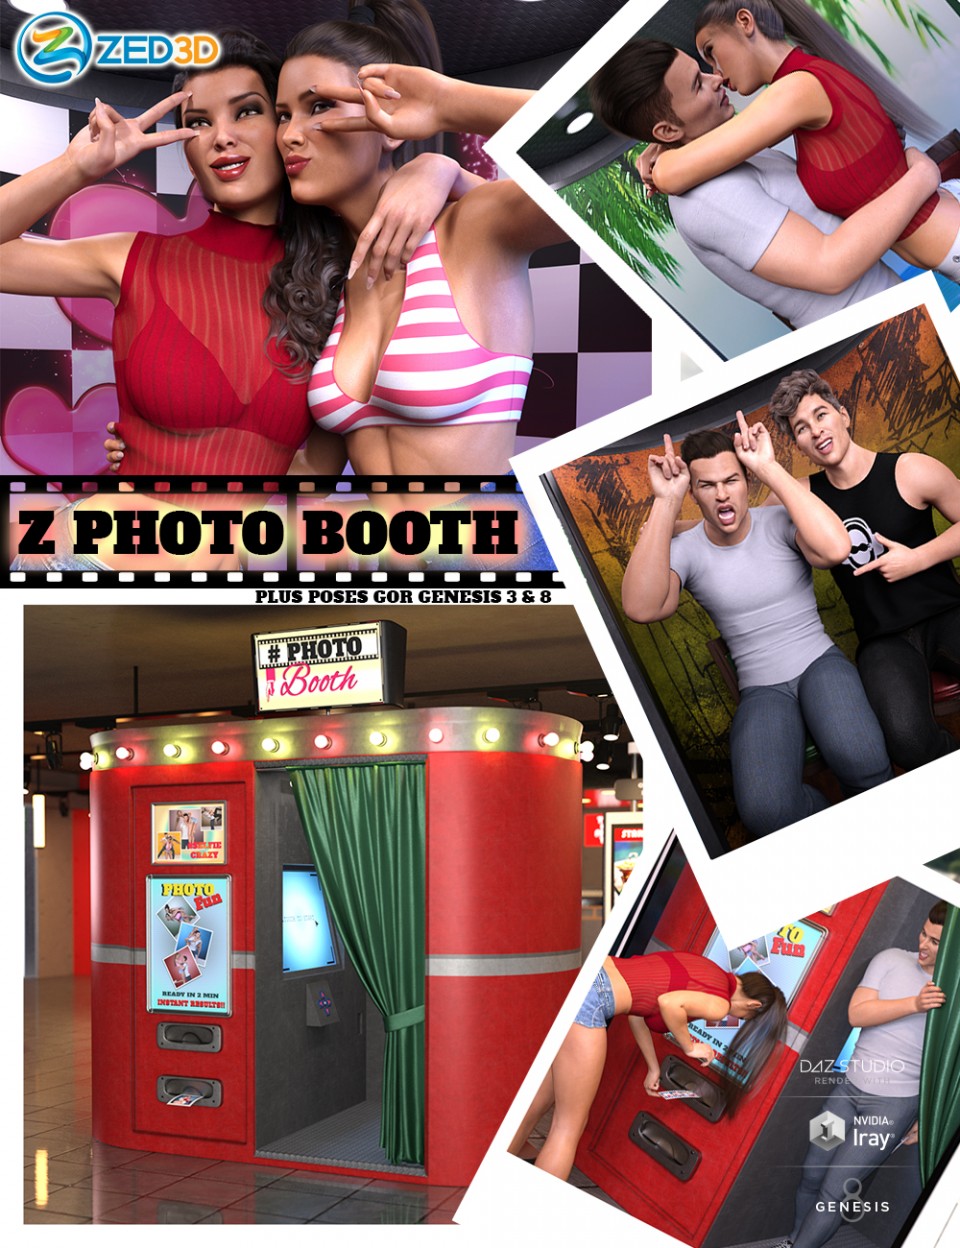 z-photo-booth-and-poses-for-genesis-3-and-8